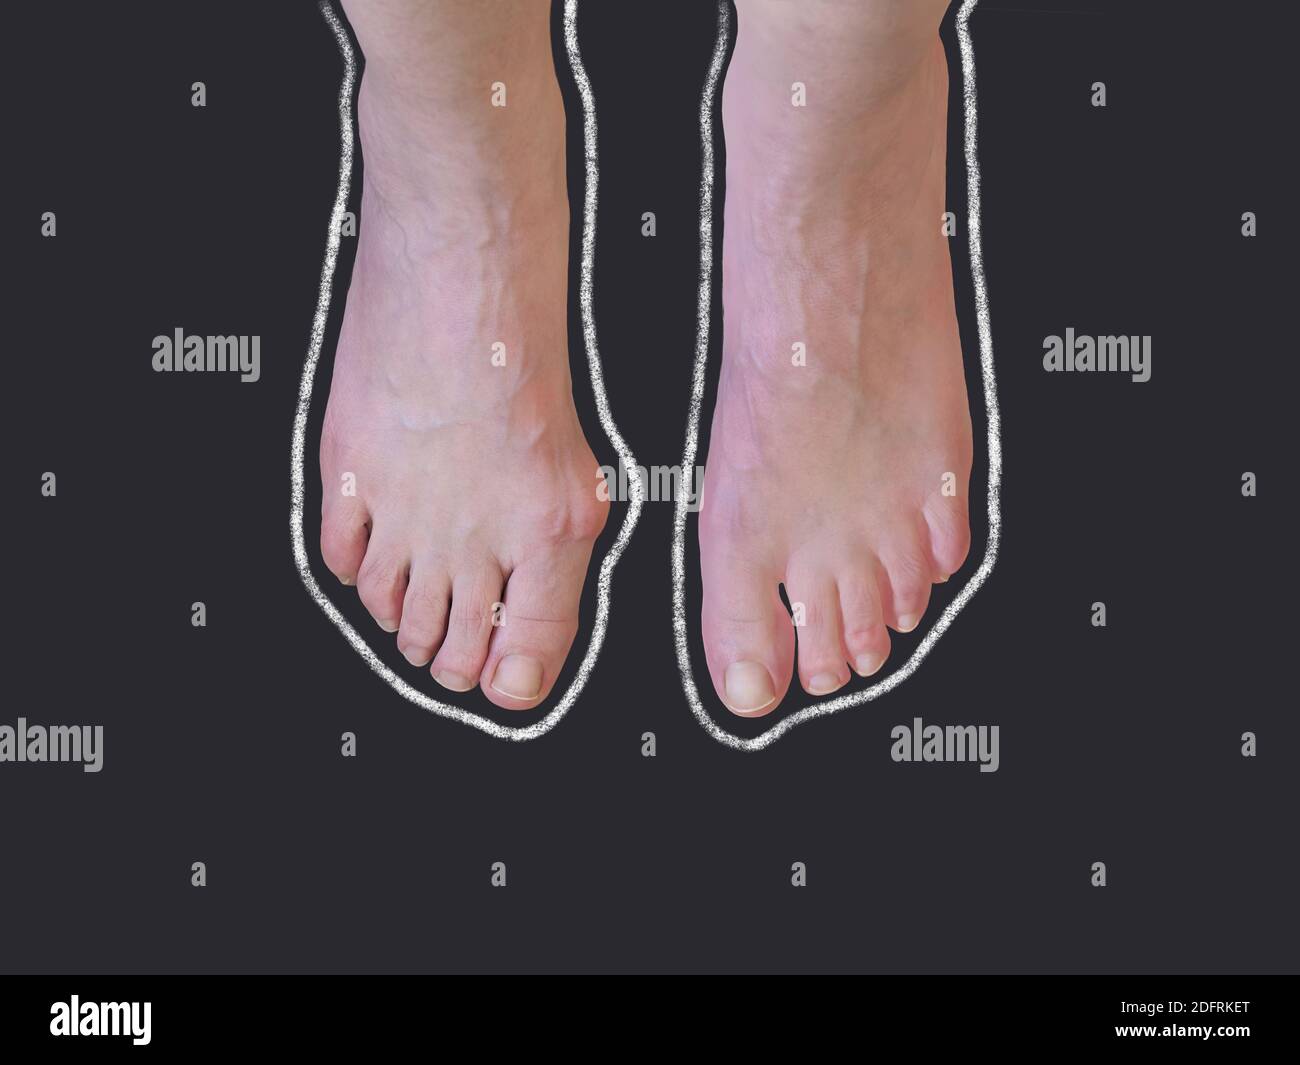 Chalk outline of hallux valgus, bunion in woman foot on black background. Overhead shot with copy space. Stock Photo